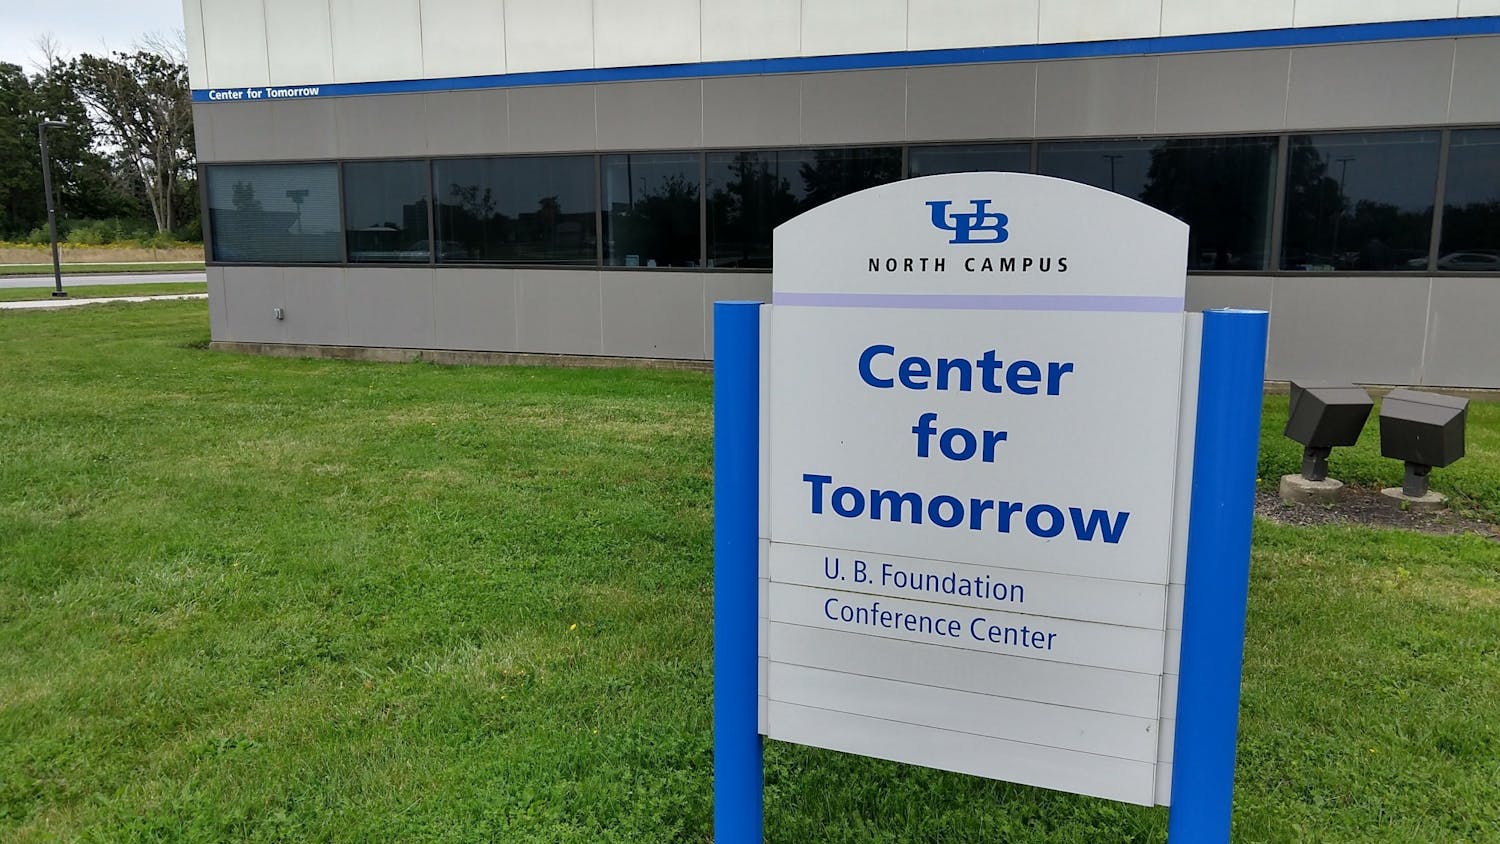 The COVID-19 testing site at the Center for Tomorrow building is one of 10 new testing locations opening on college campuses across the state.